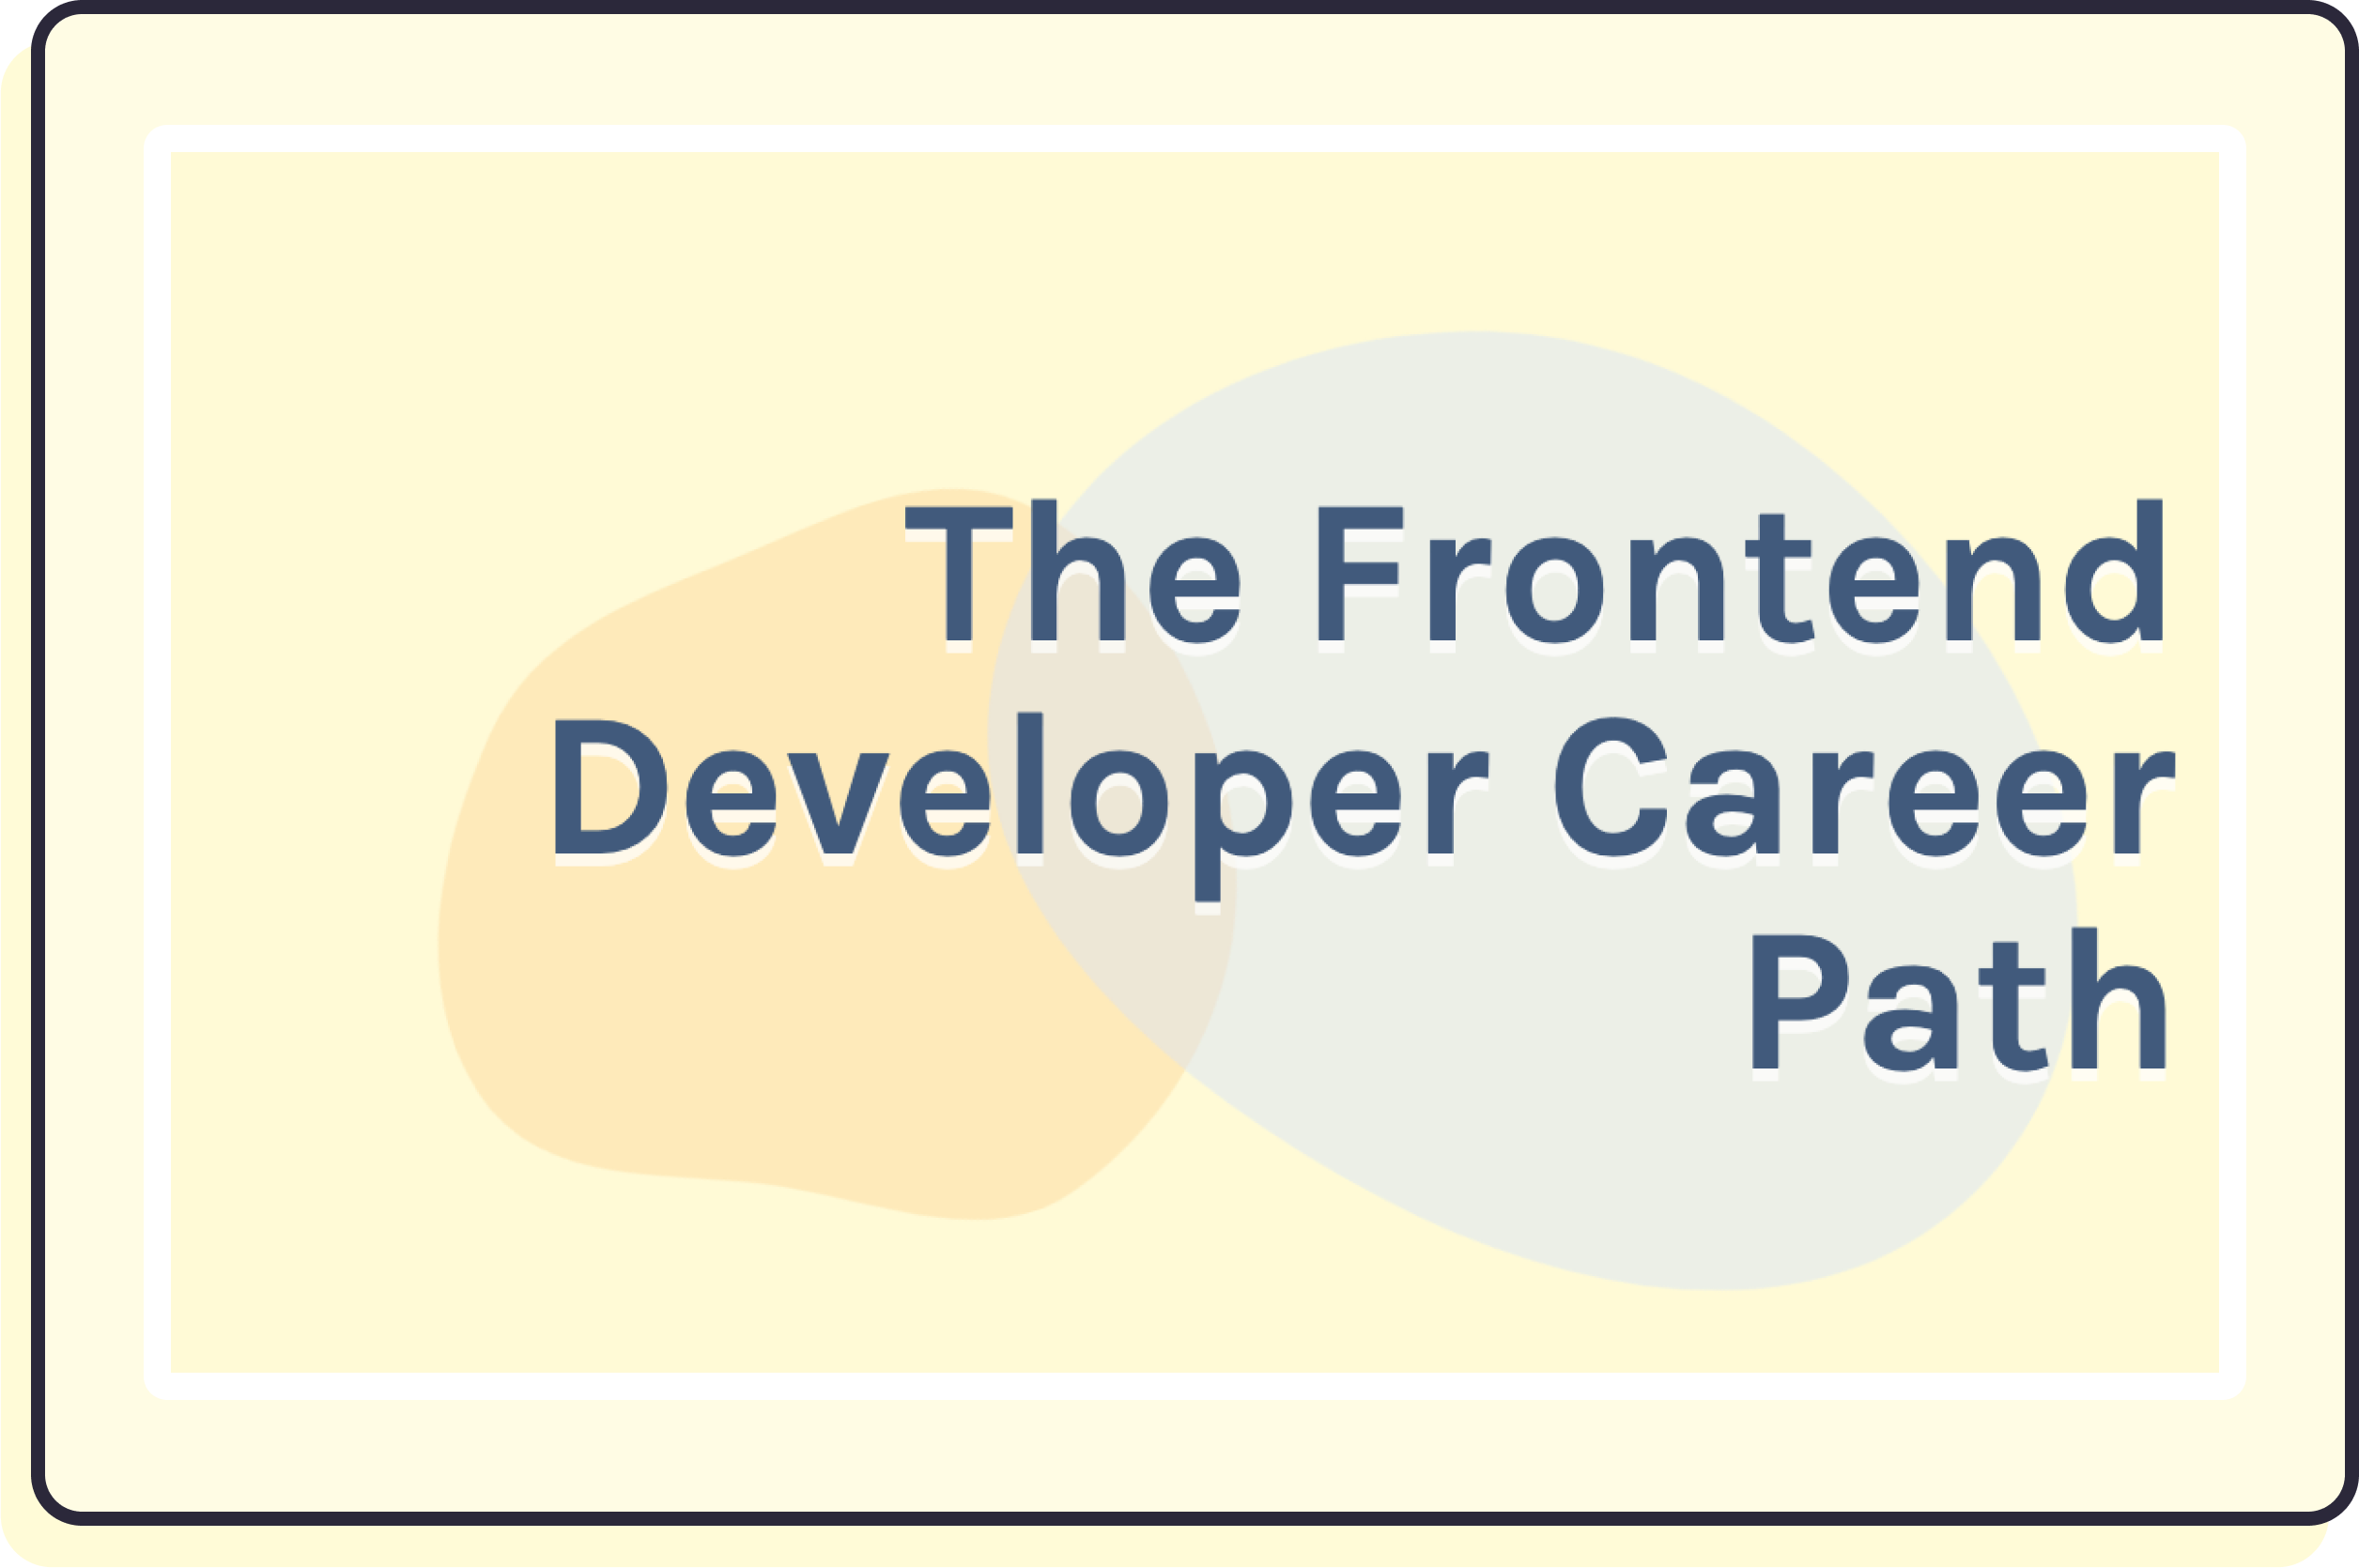 The Frontend Developer Career Path